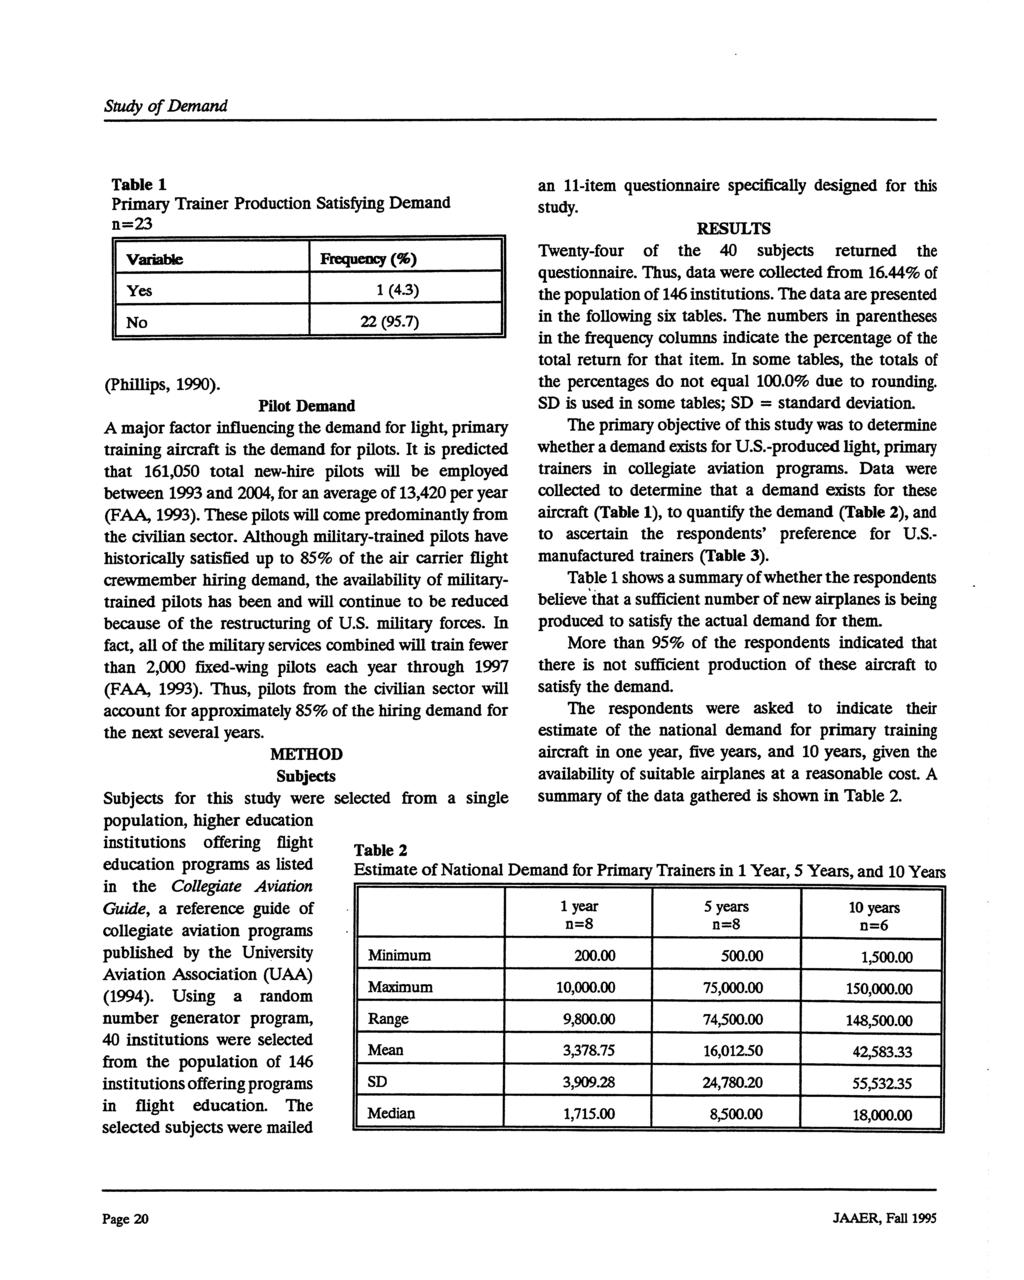 Journal of Aviation/Aerospace Education & Research, Vol. 6, No. 1 [1995], Art. 5 Table 1 an 11-item questionnaire specifically designed for this Primary Trainer Production Satisfying Demand study.